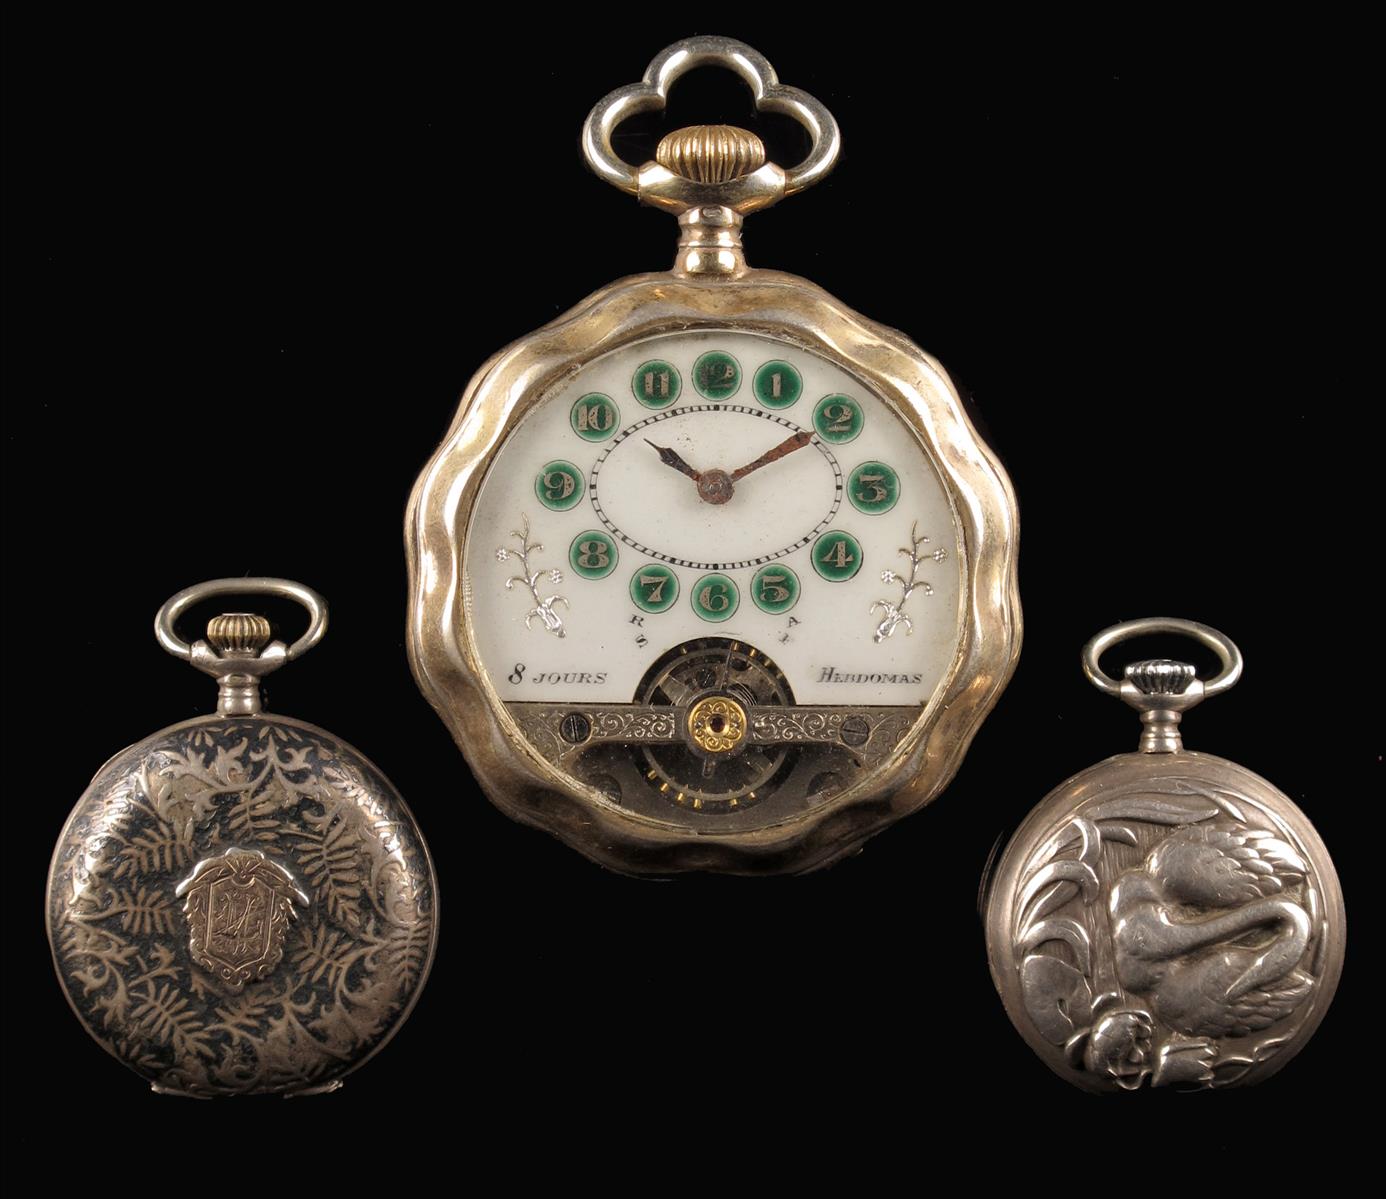 A silver gilt 8 day Hebdomas watch, with green chapters and visible lever escapement, in faceted